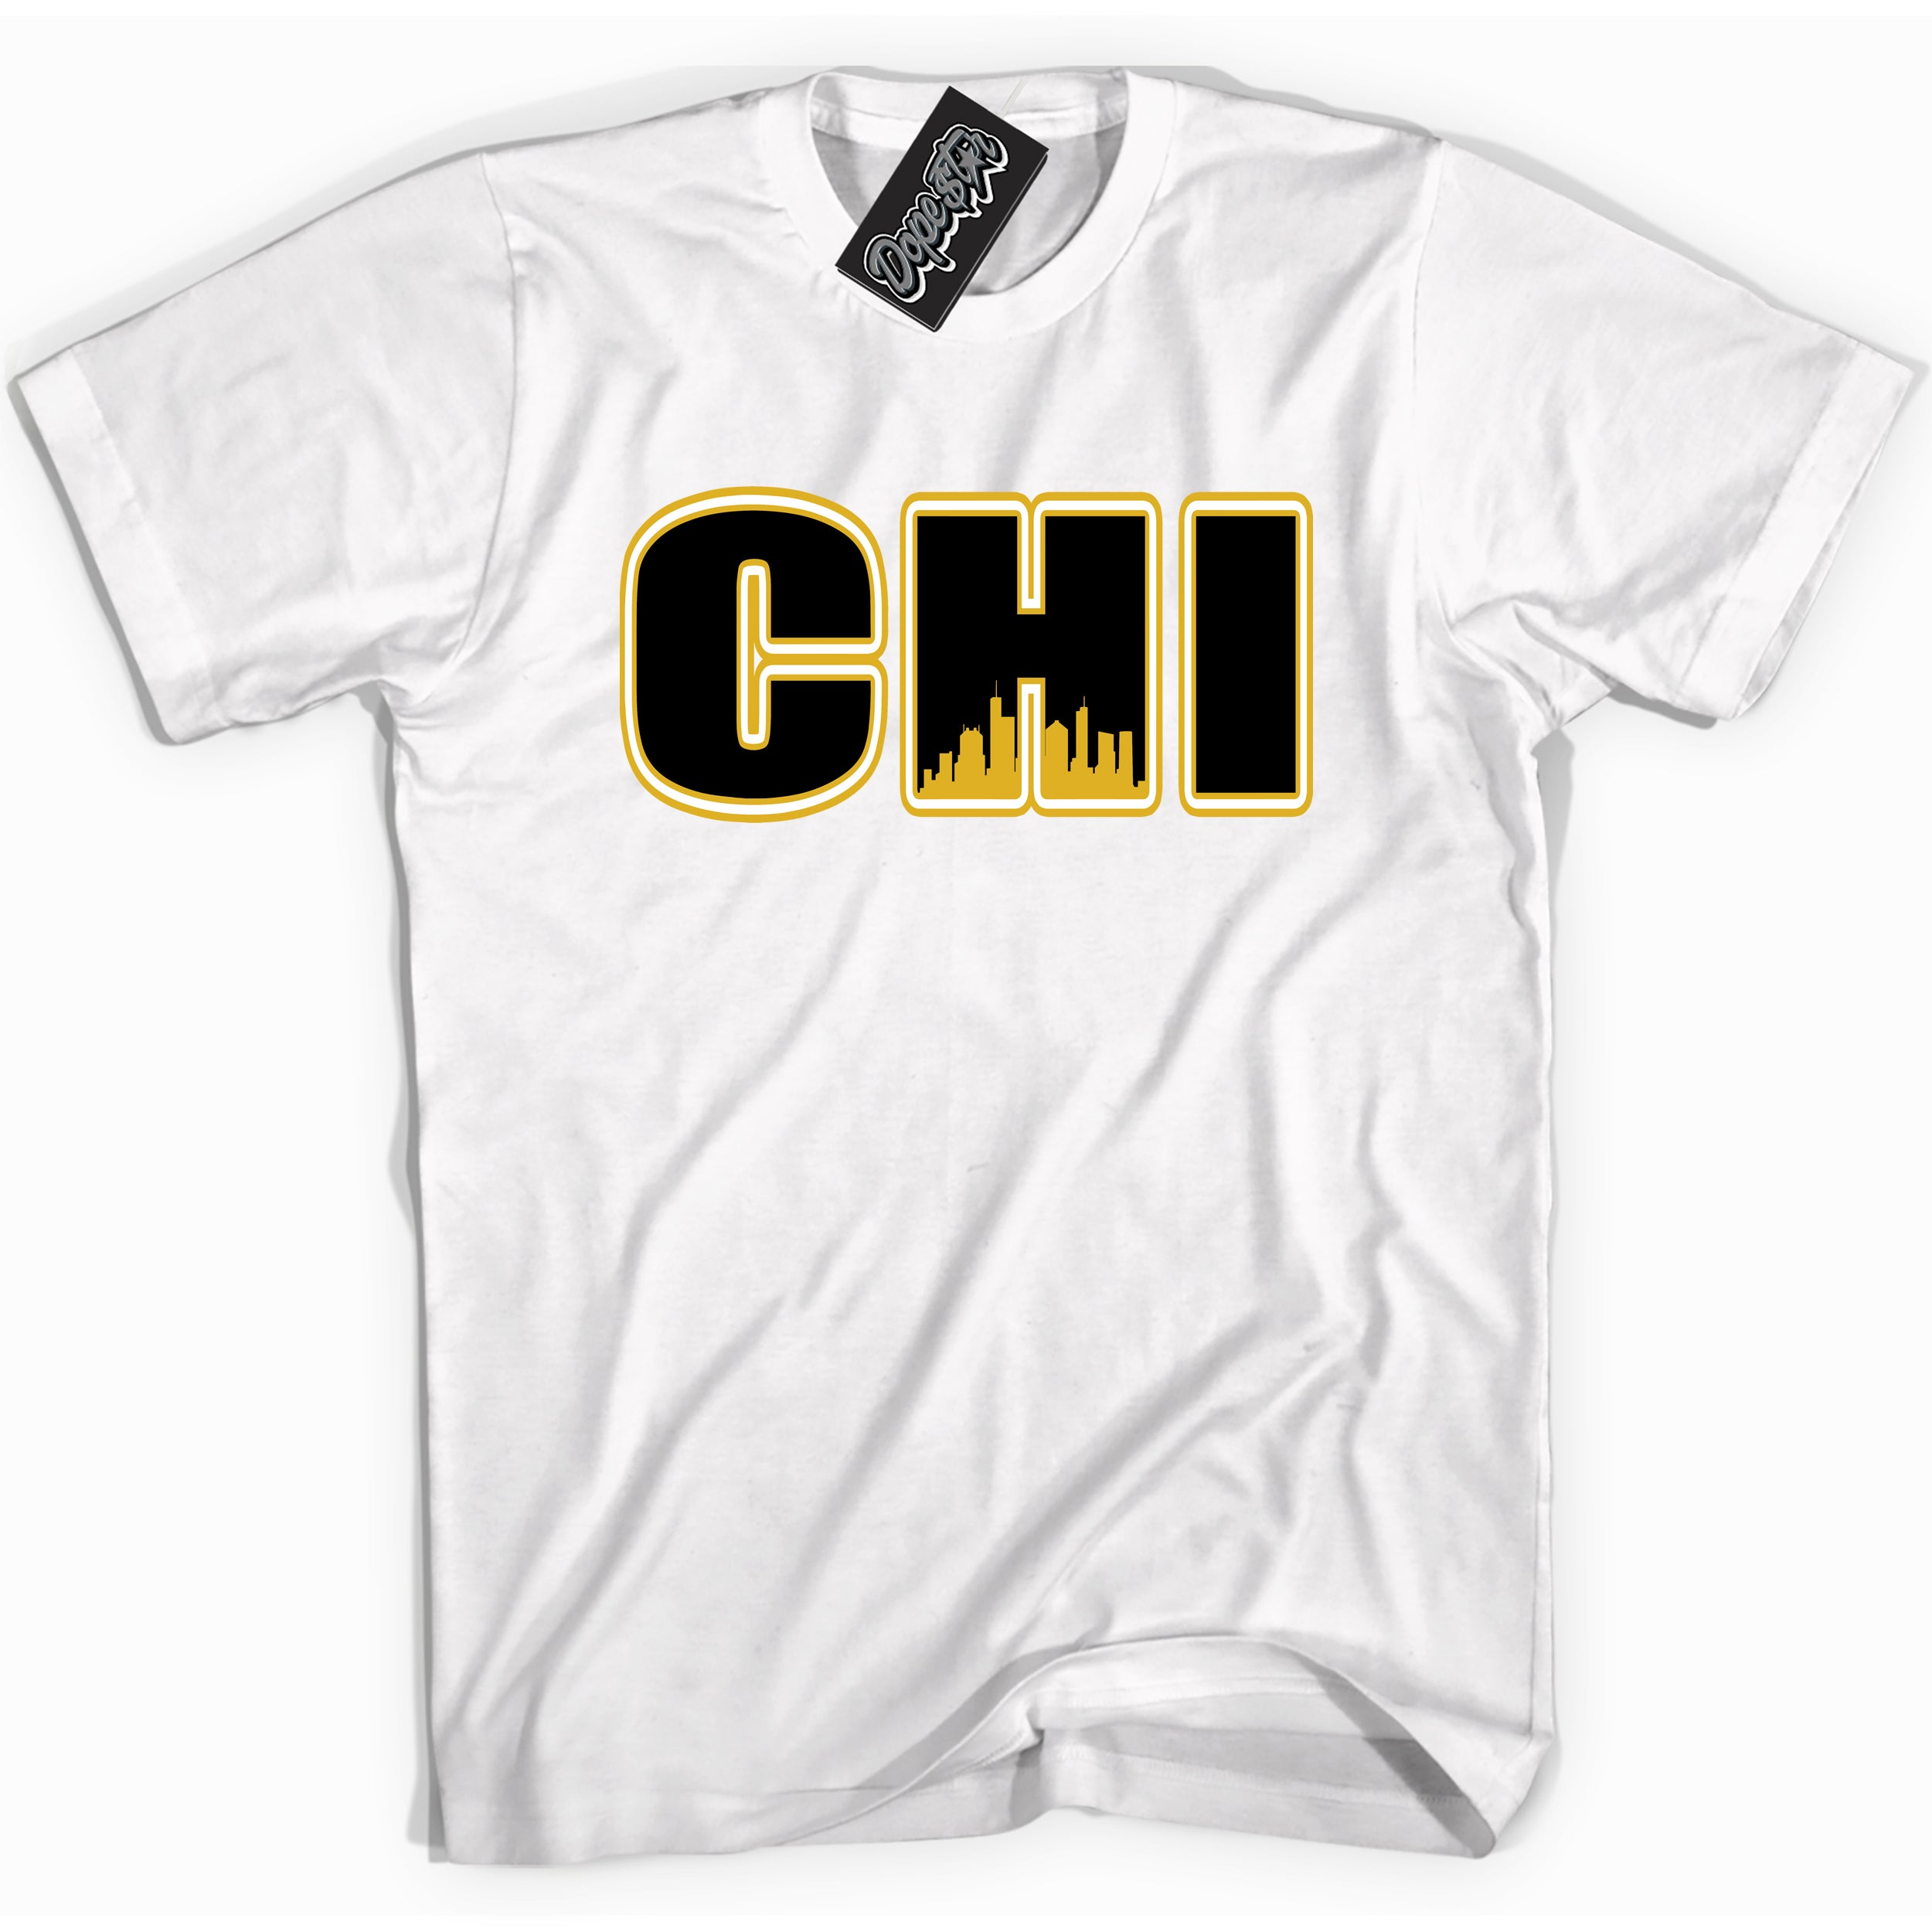 Cool White Shirt with “ Chicago” design that perfectly matches Yellow Ochre 6s Sneakers.